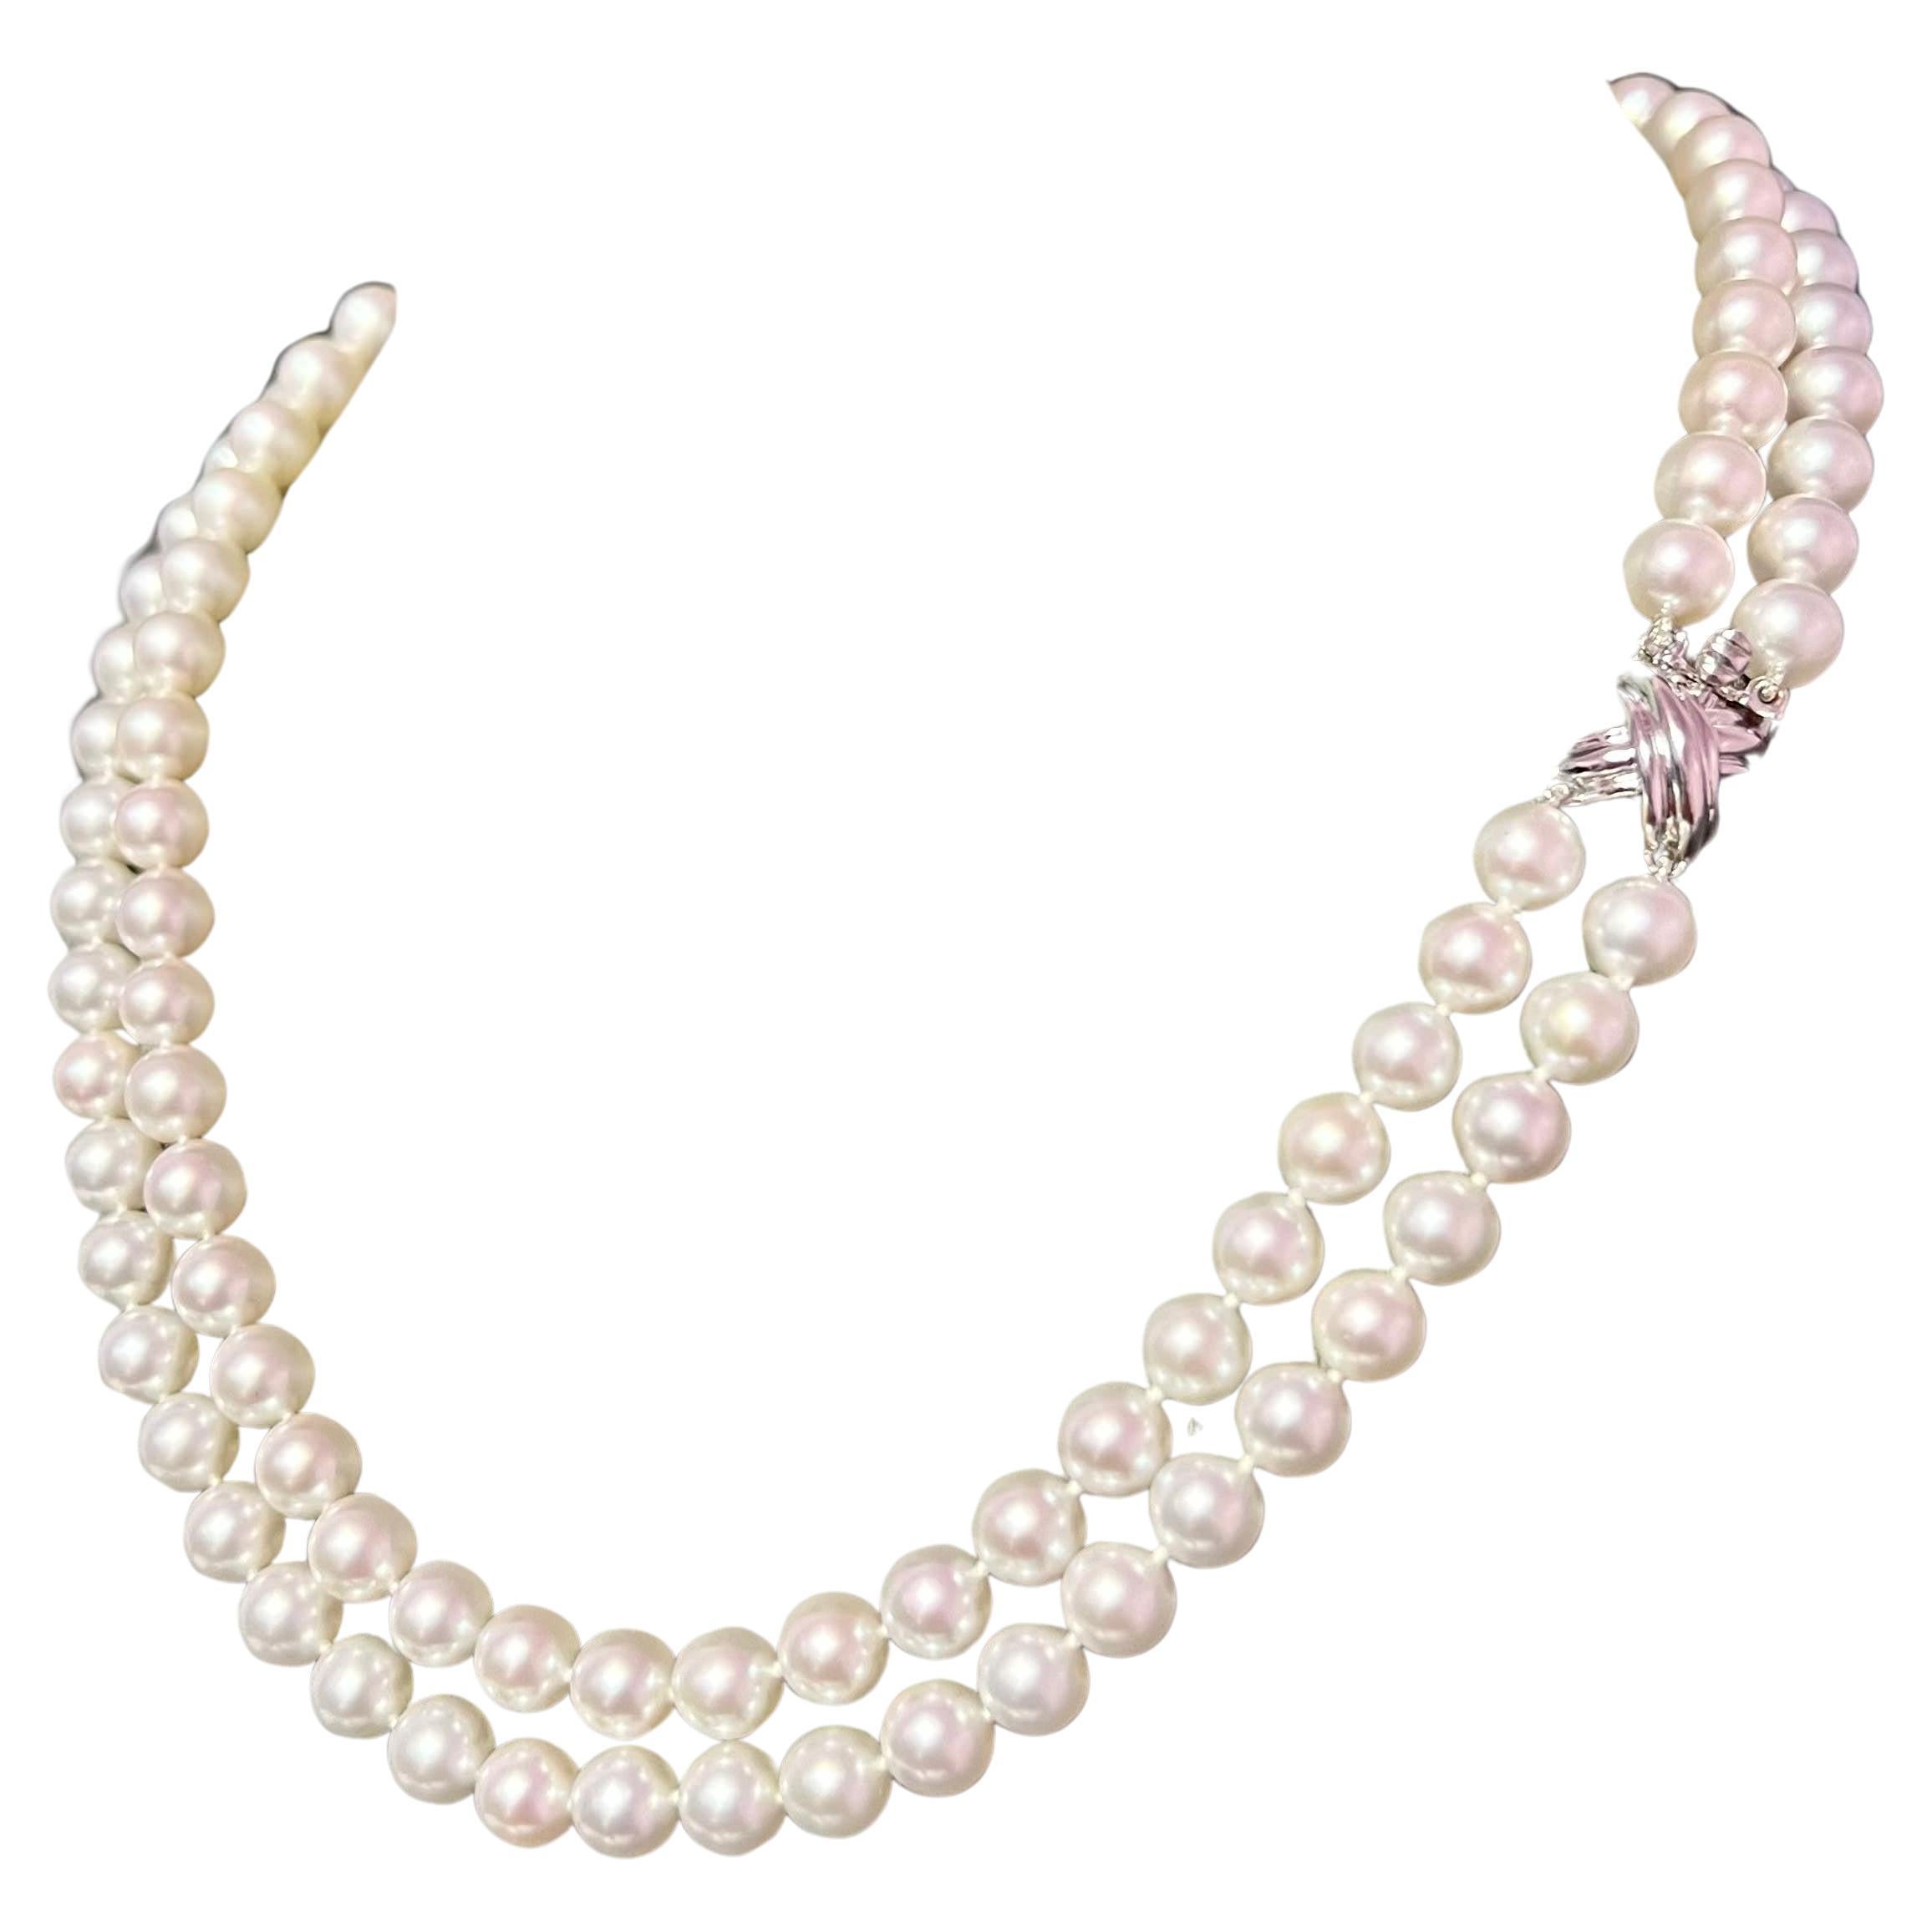 Tiffany & Co Estate Akoya Pearl Necklace 16-17" 18k Gold 7 mm Certified For Sale